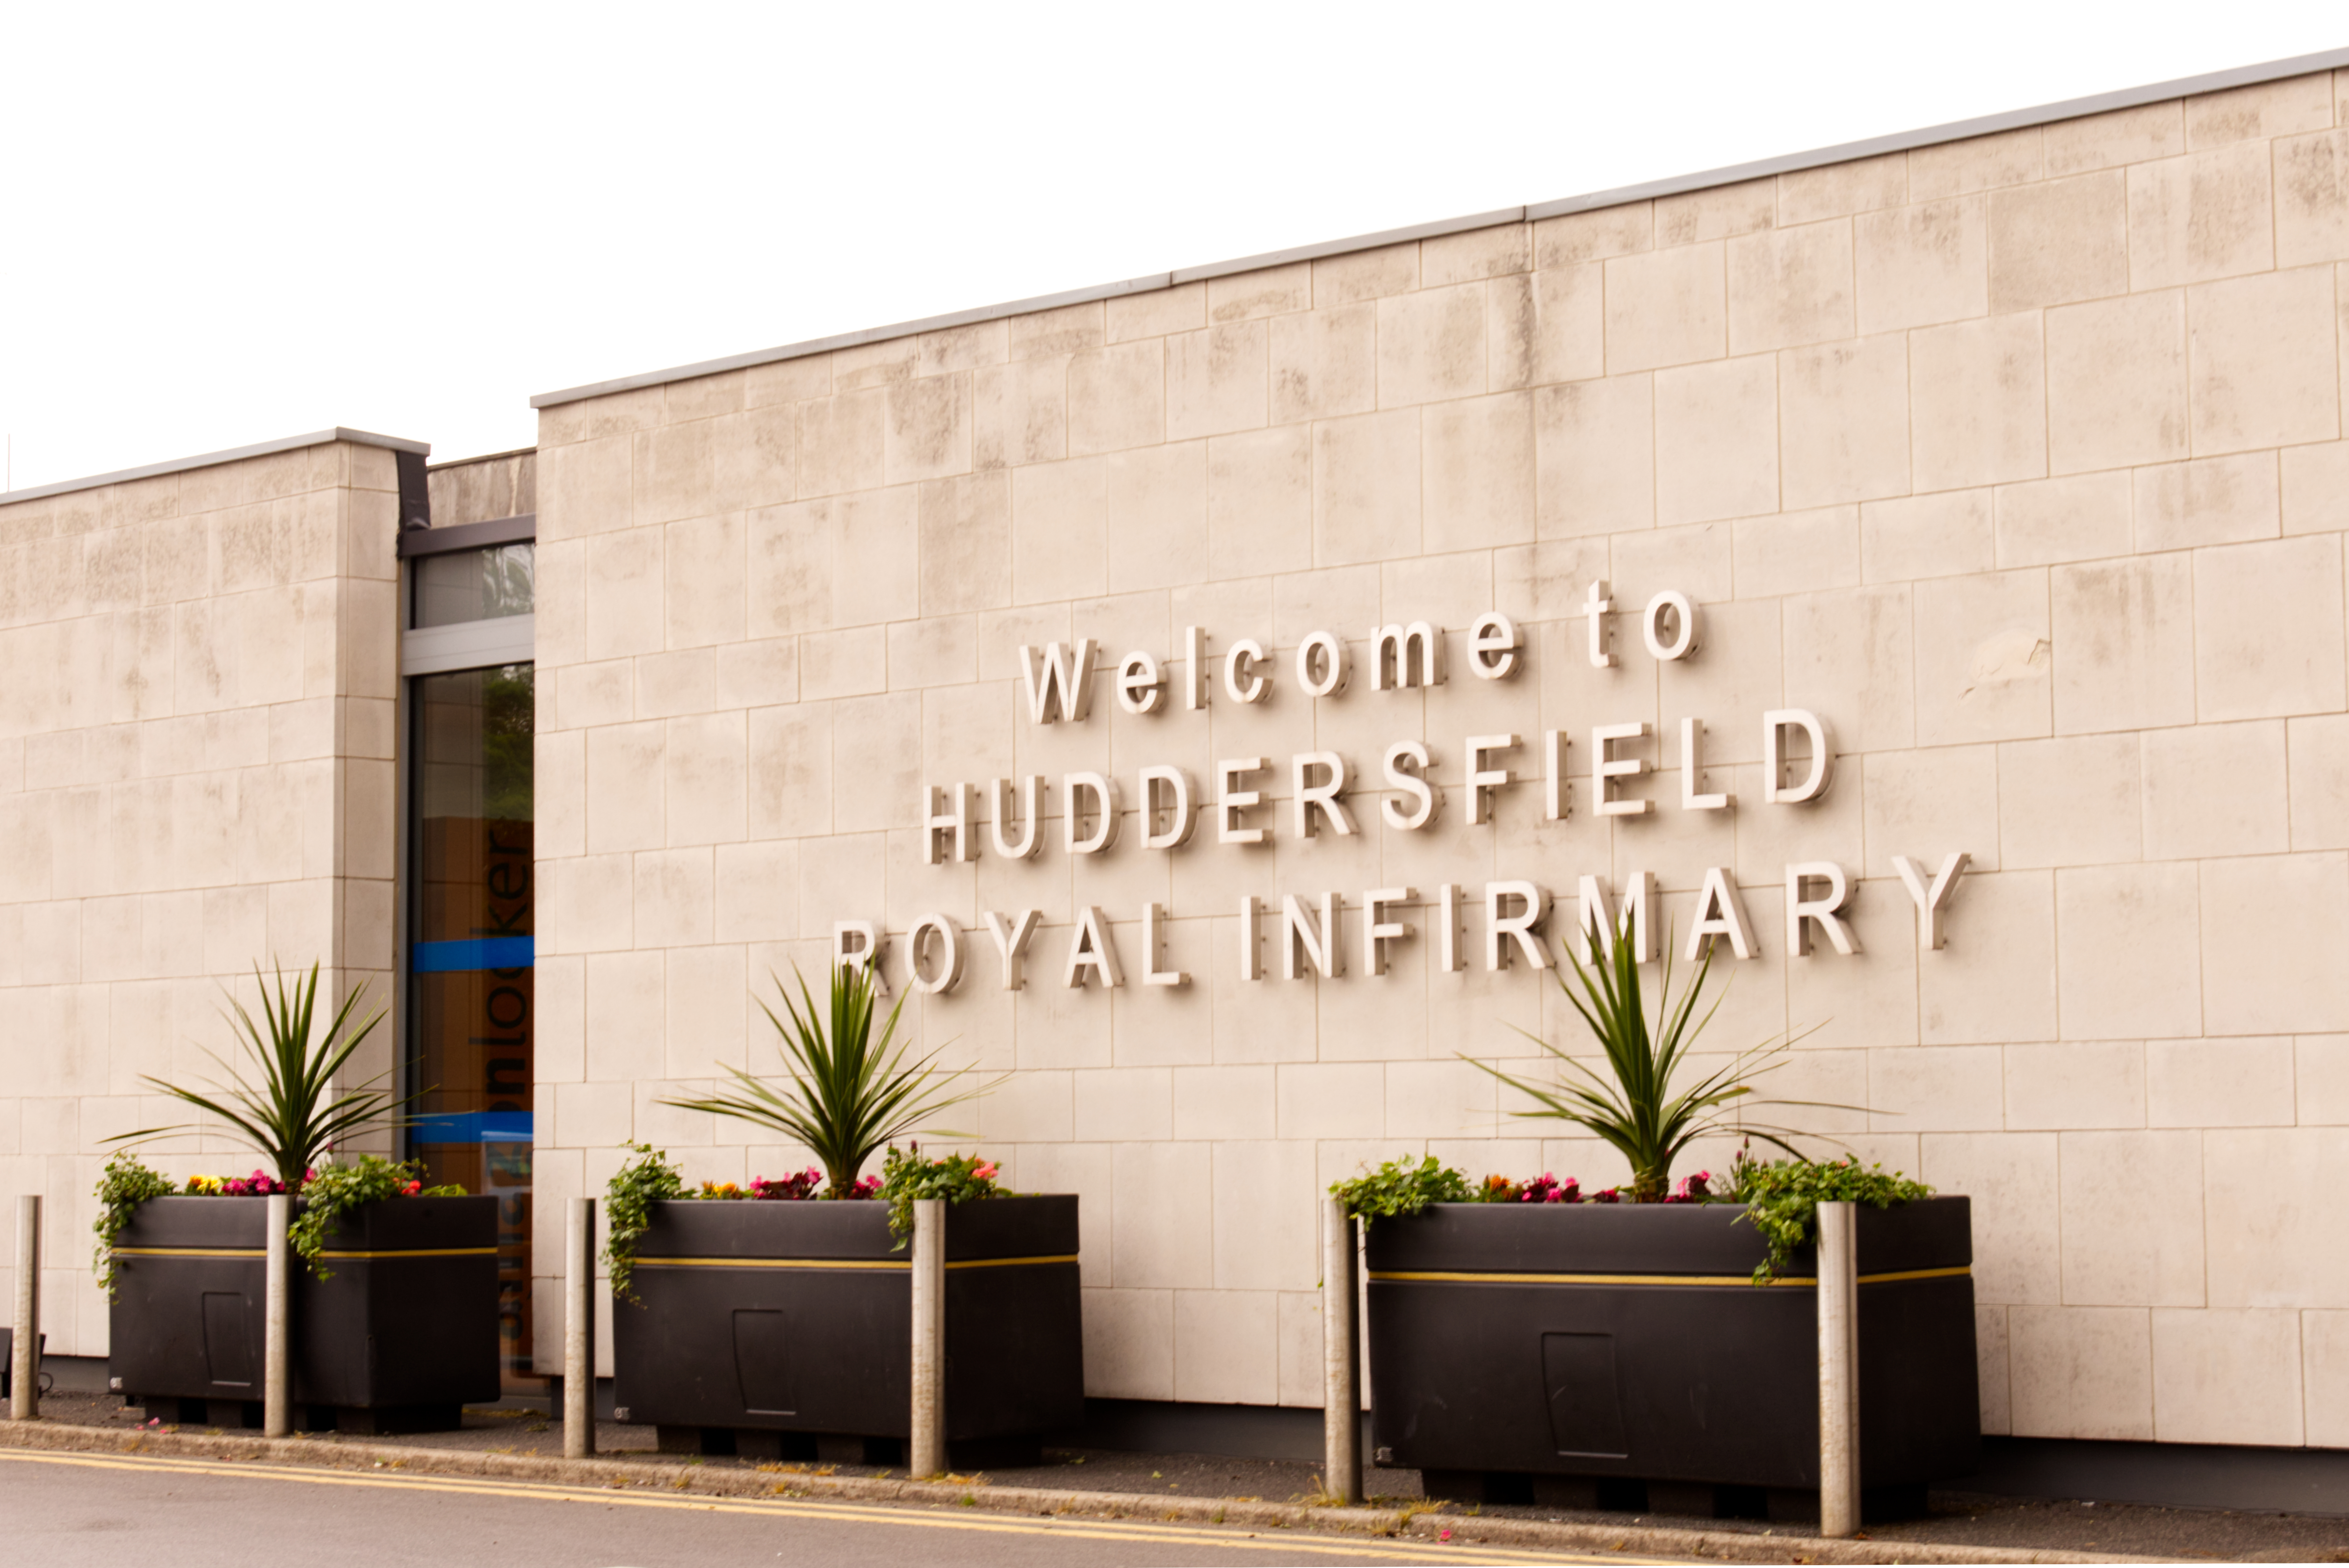 The entrance to Huddersfield Royal Infirmary